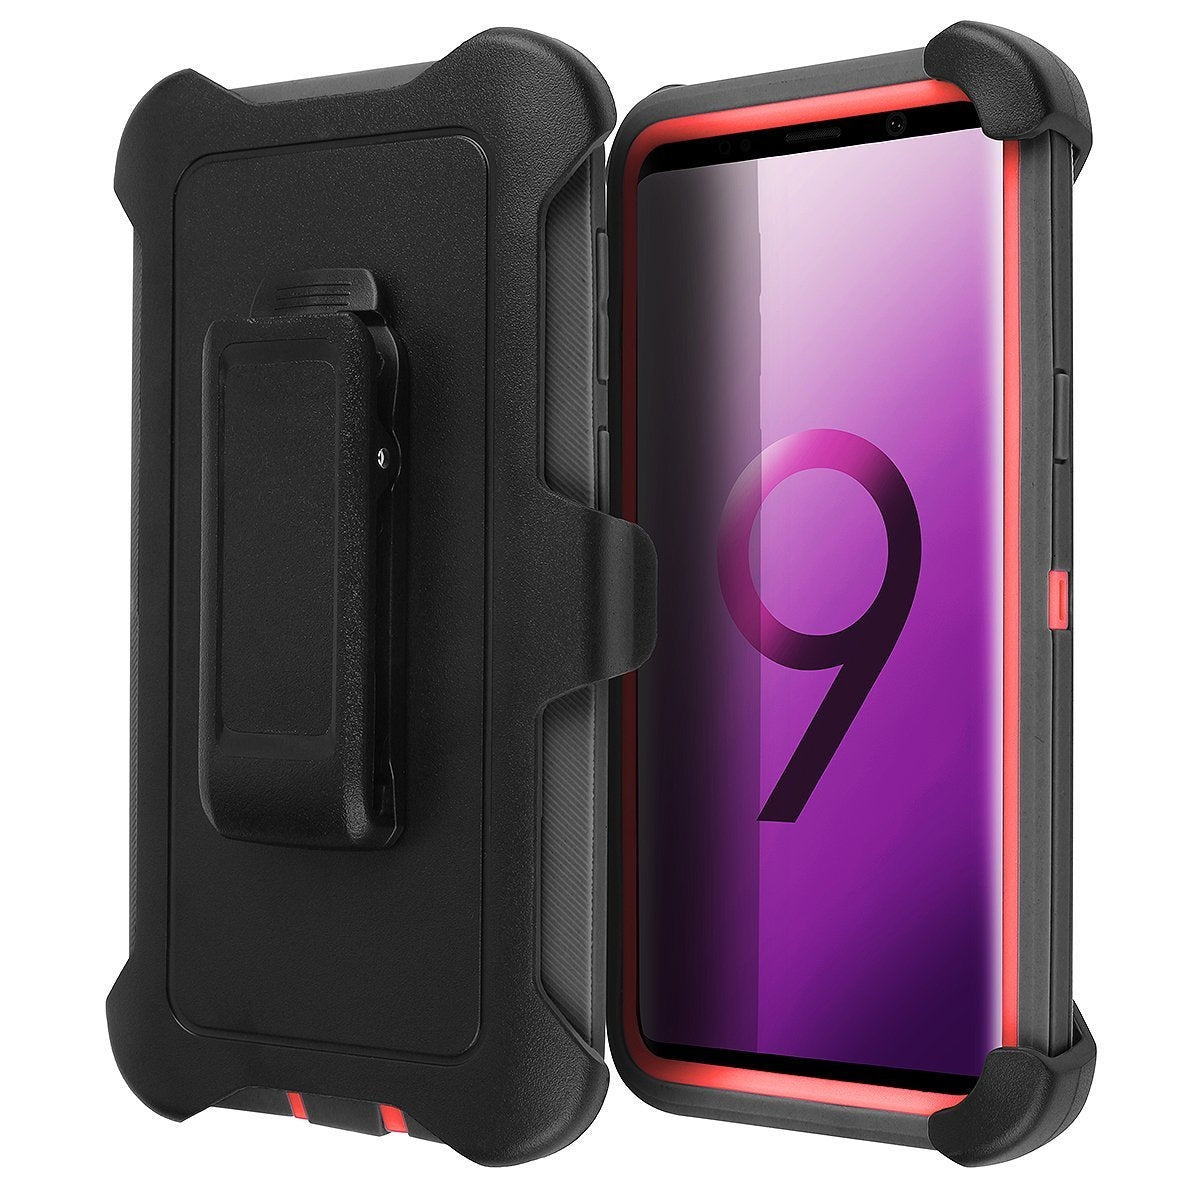 Galaxy S9 Belt Clip Shockproof Case, AICase 3 in 1 Armor [Full body] Heavy Duty Holster Case Belt Clip +Protective Kickstand Shock Reduction Case for Samsung Galaxy S9 (Black+Red))